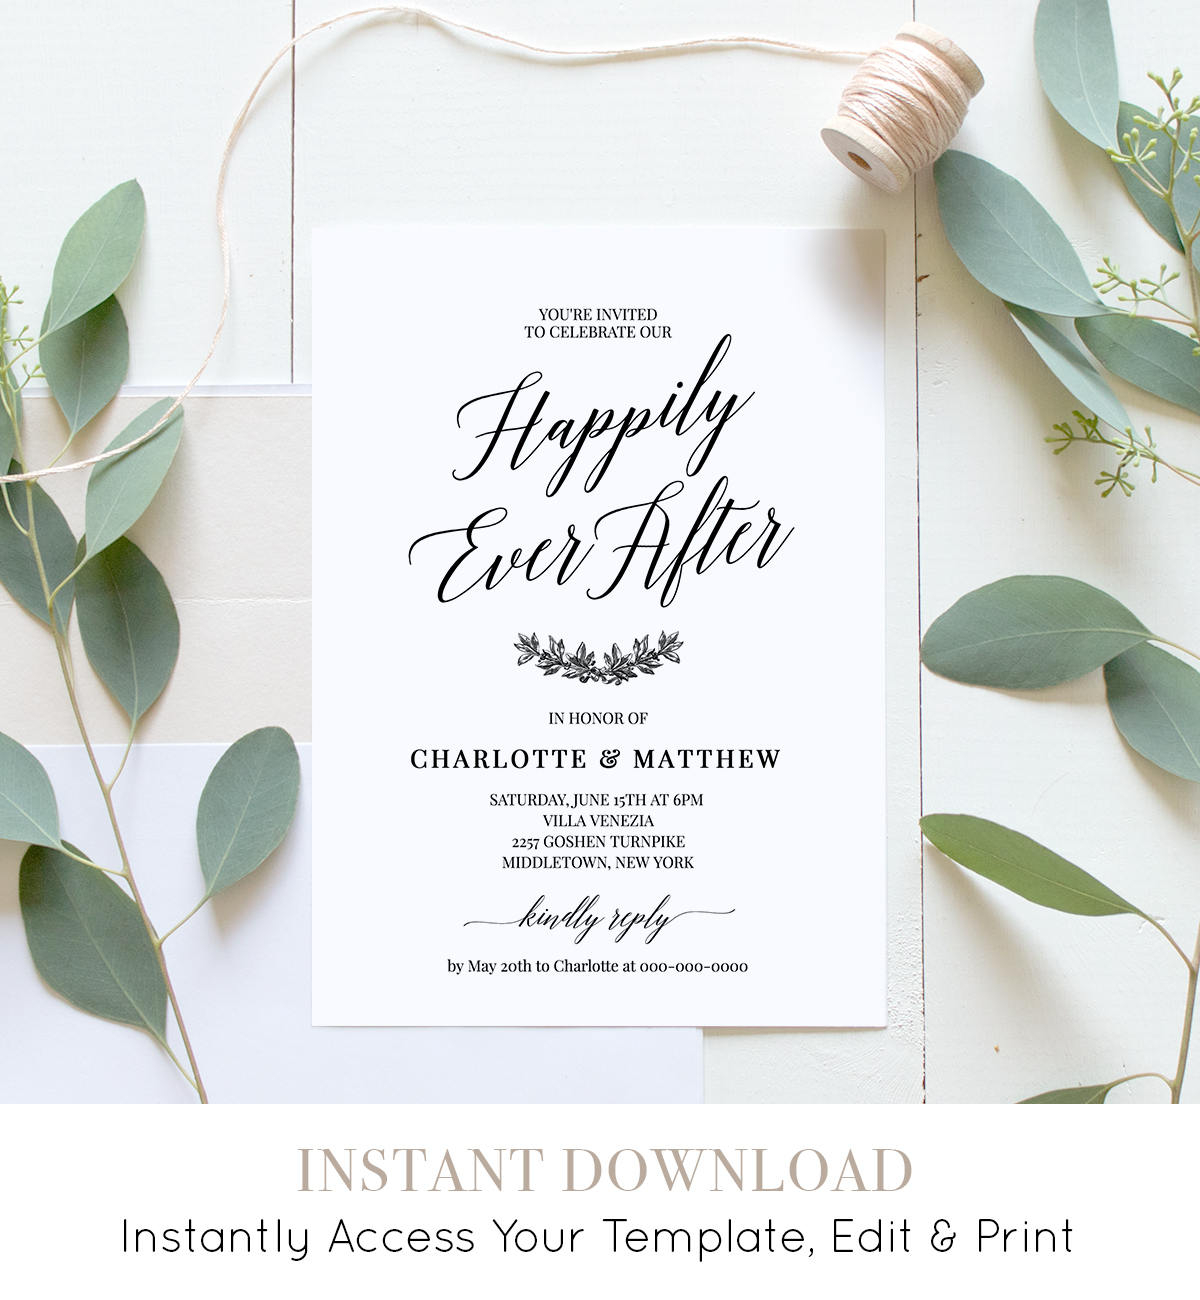 Wedding Reception Party Invitation Post Wedding Celebration After intended for proportions 1200 X 1300